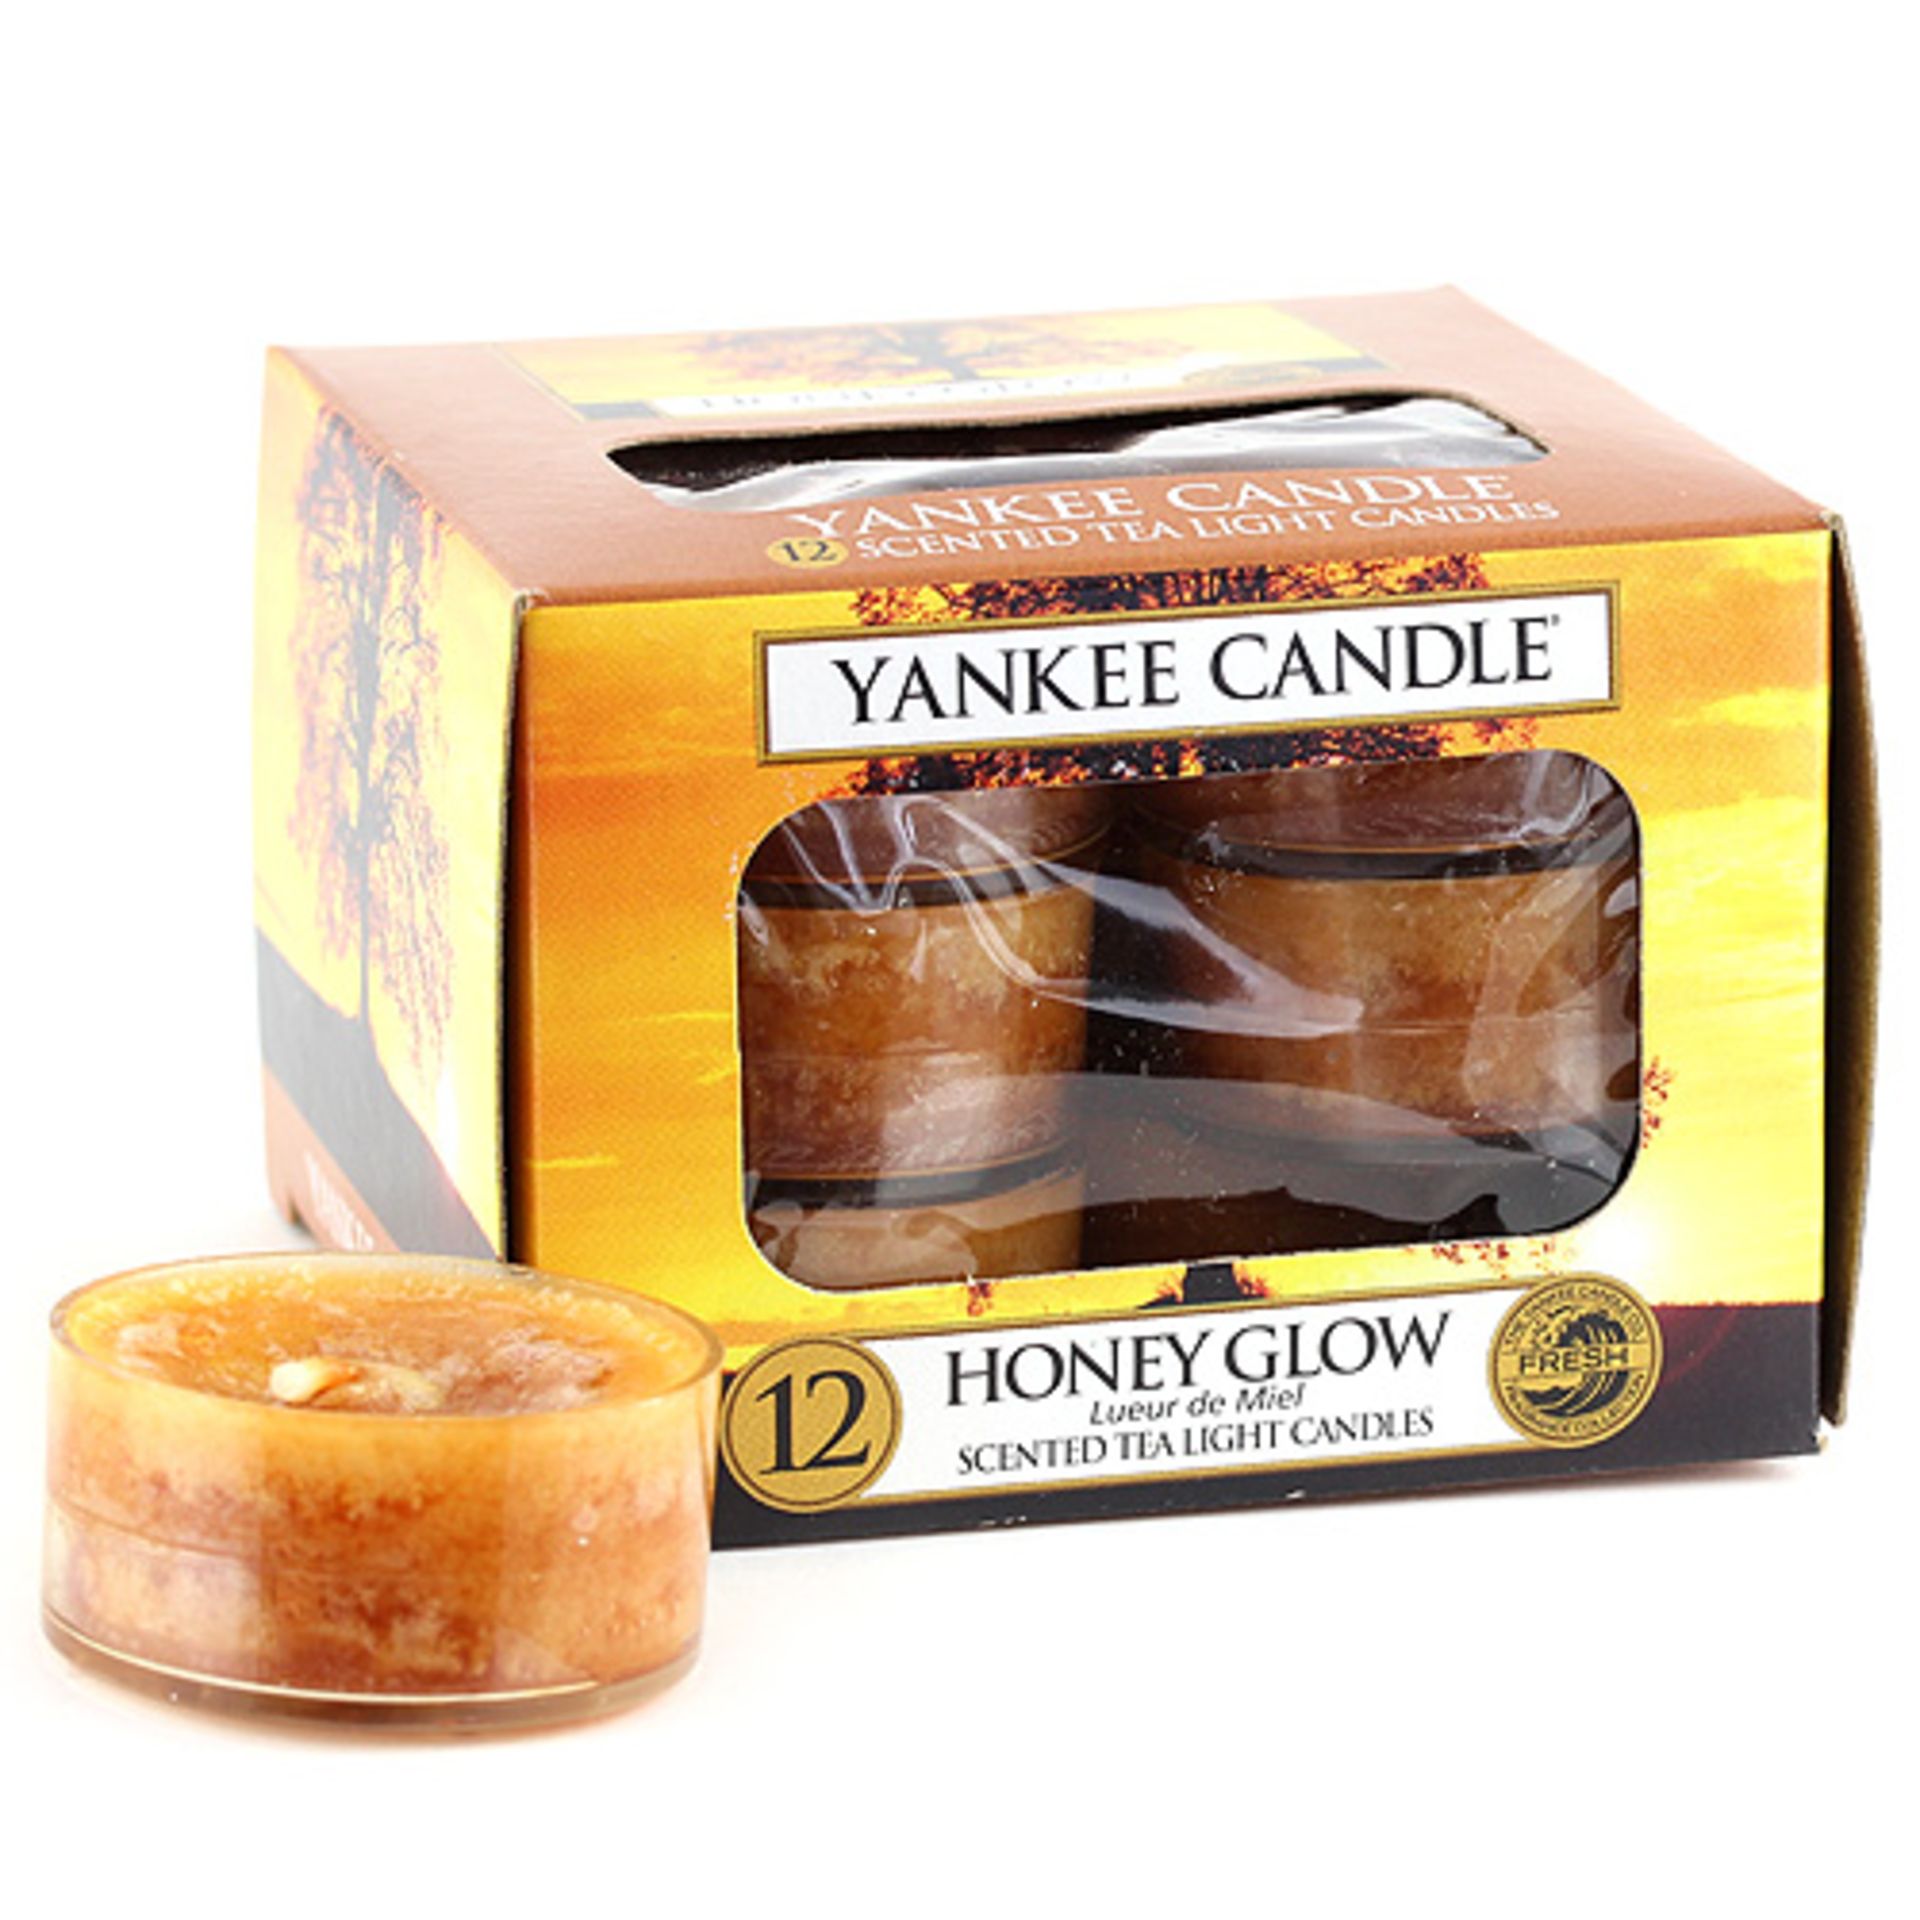 V *TRADE QTY* Brand New 12 Yankee Candle Scented Tea Light Candles Honey Glow eBay Price £8.24 X 5